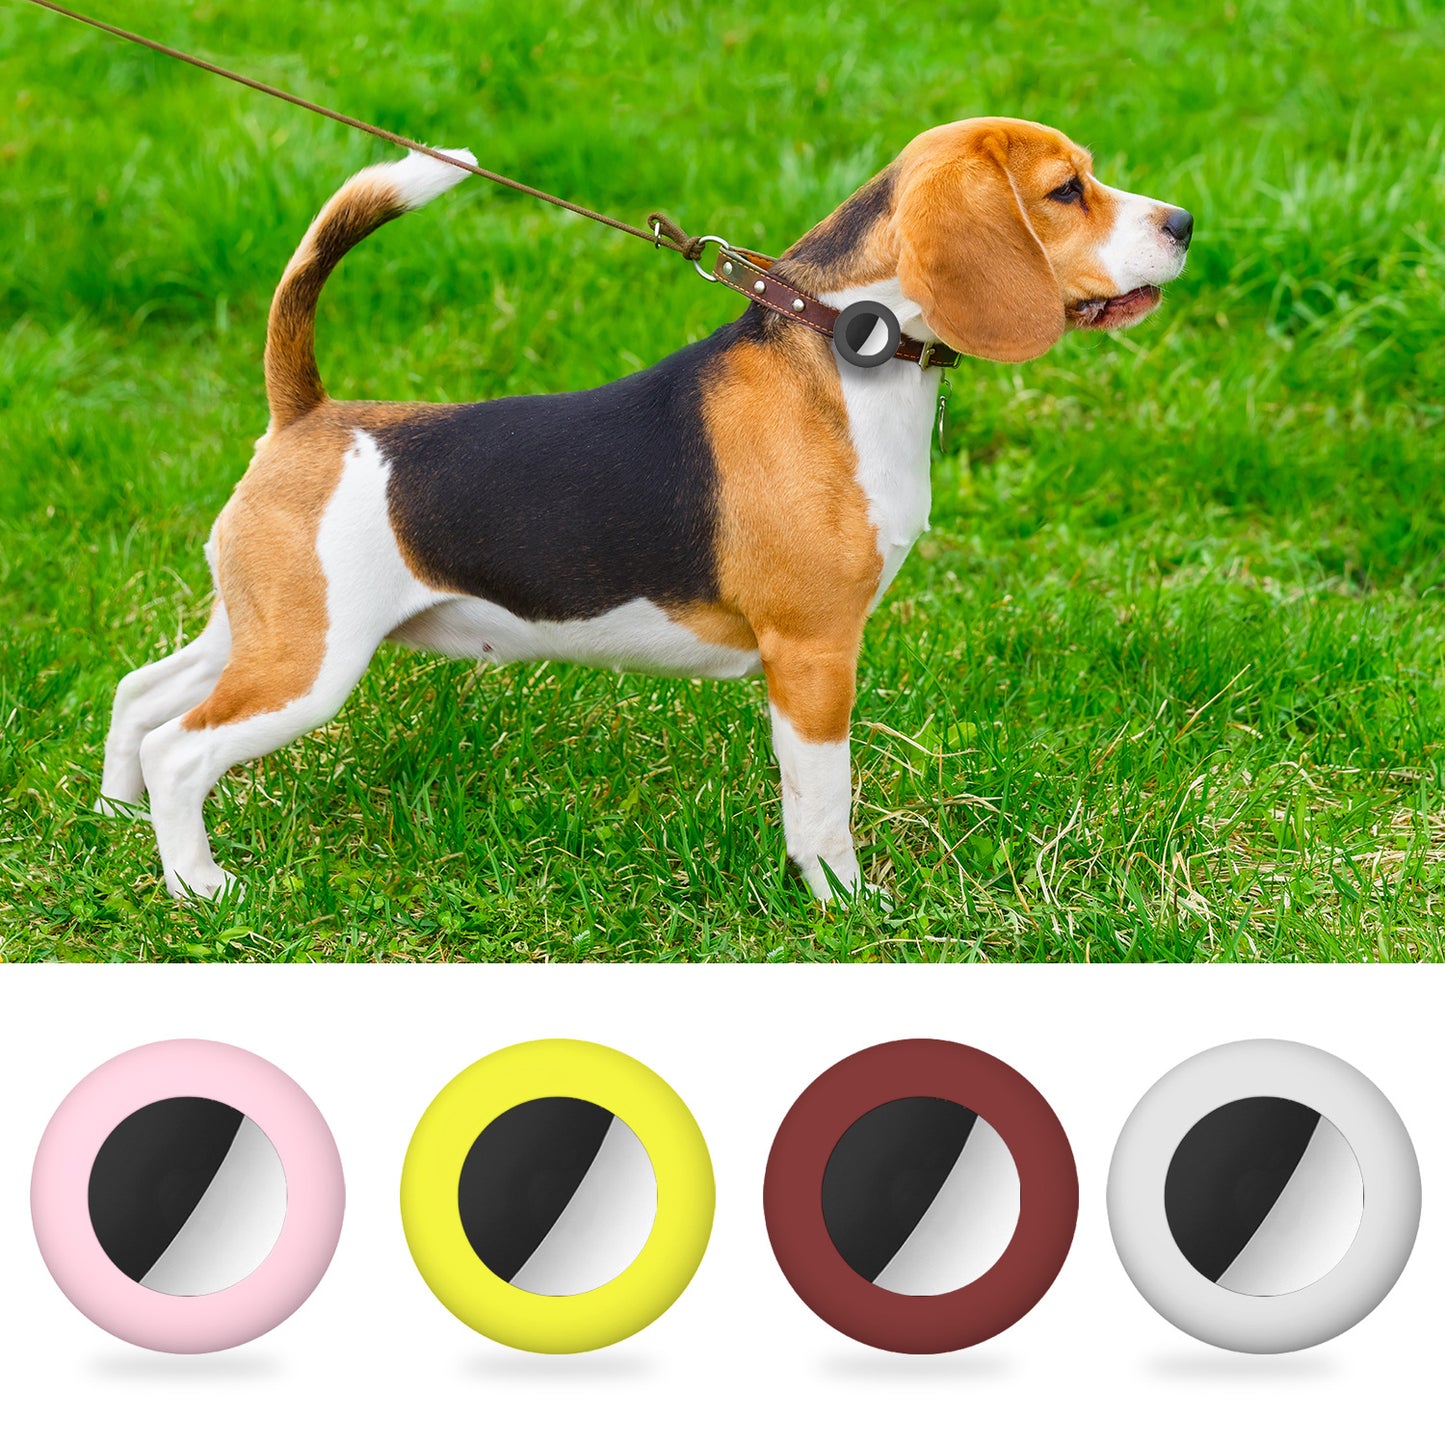 INSINC Creative Pet Type Silicone Soft Shell To Prevent Loss Airtag Case